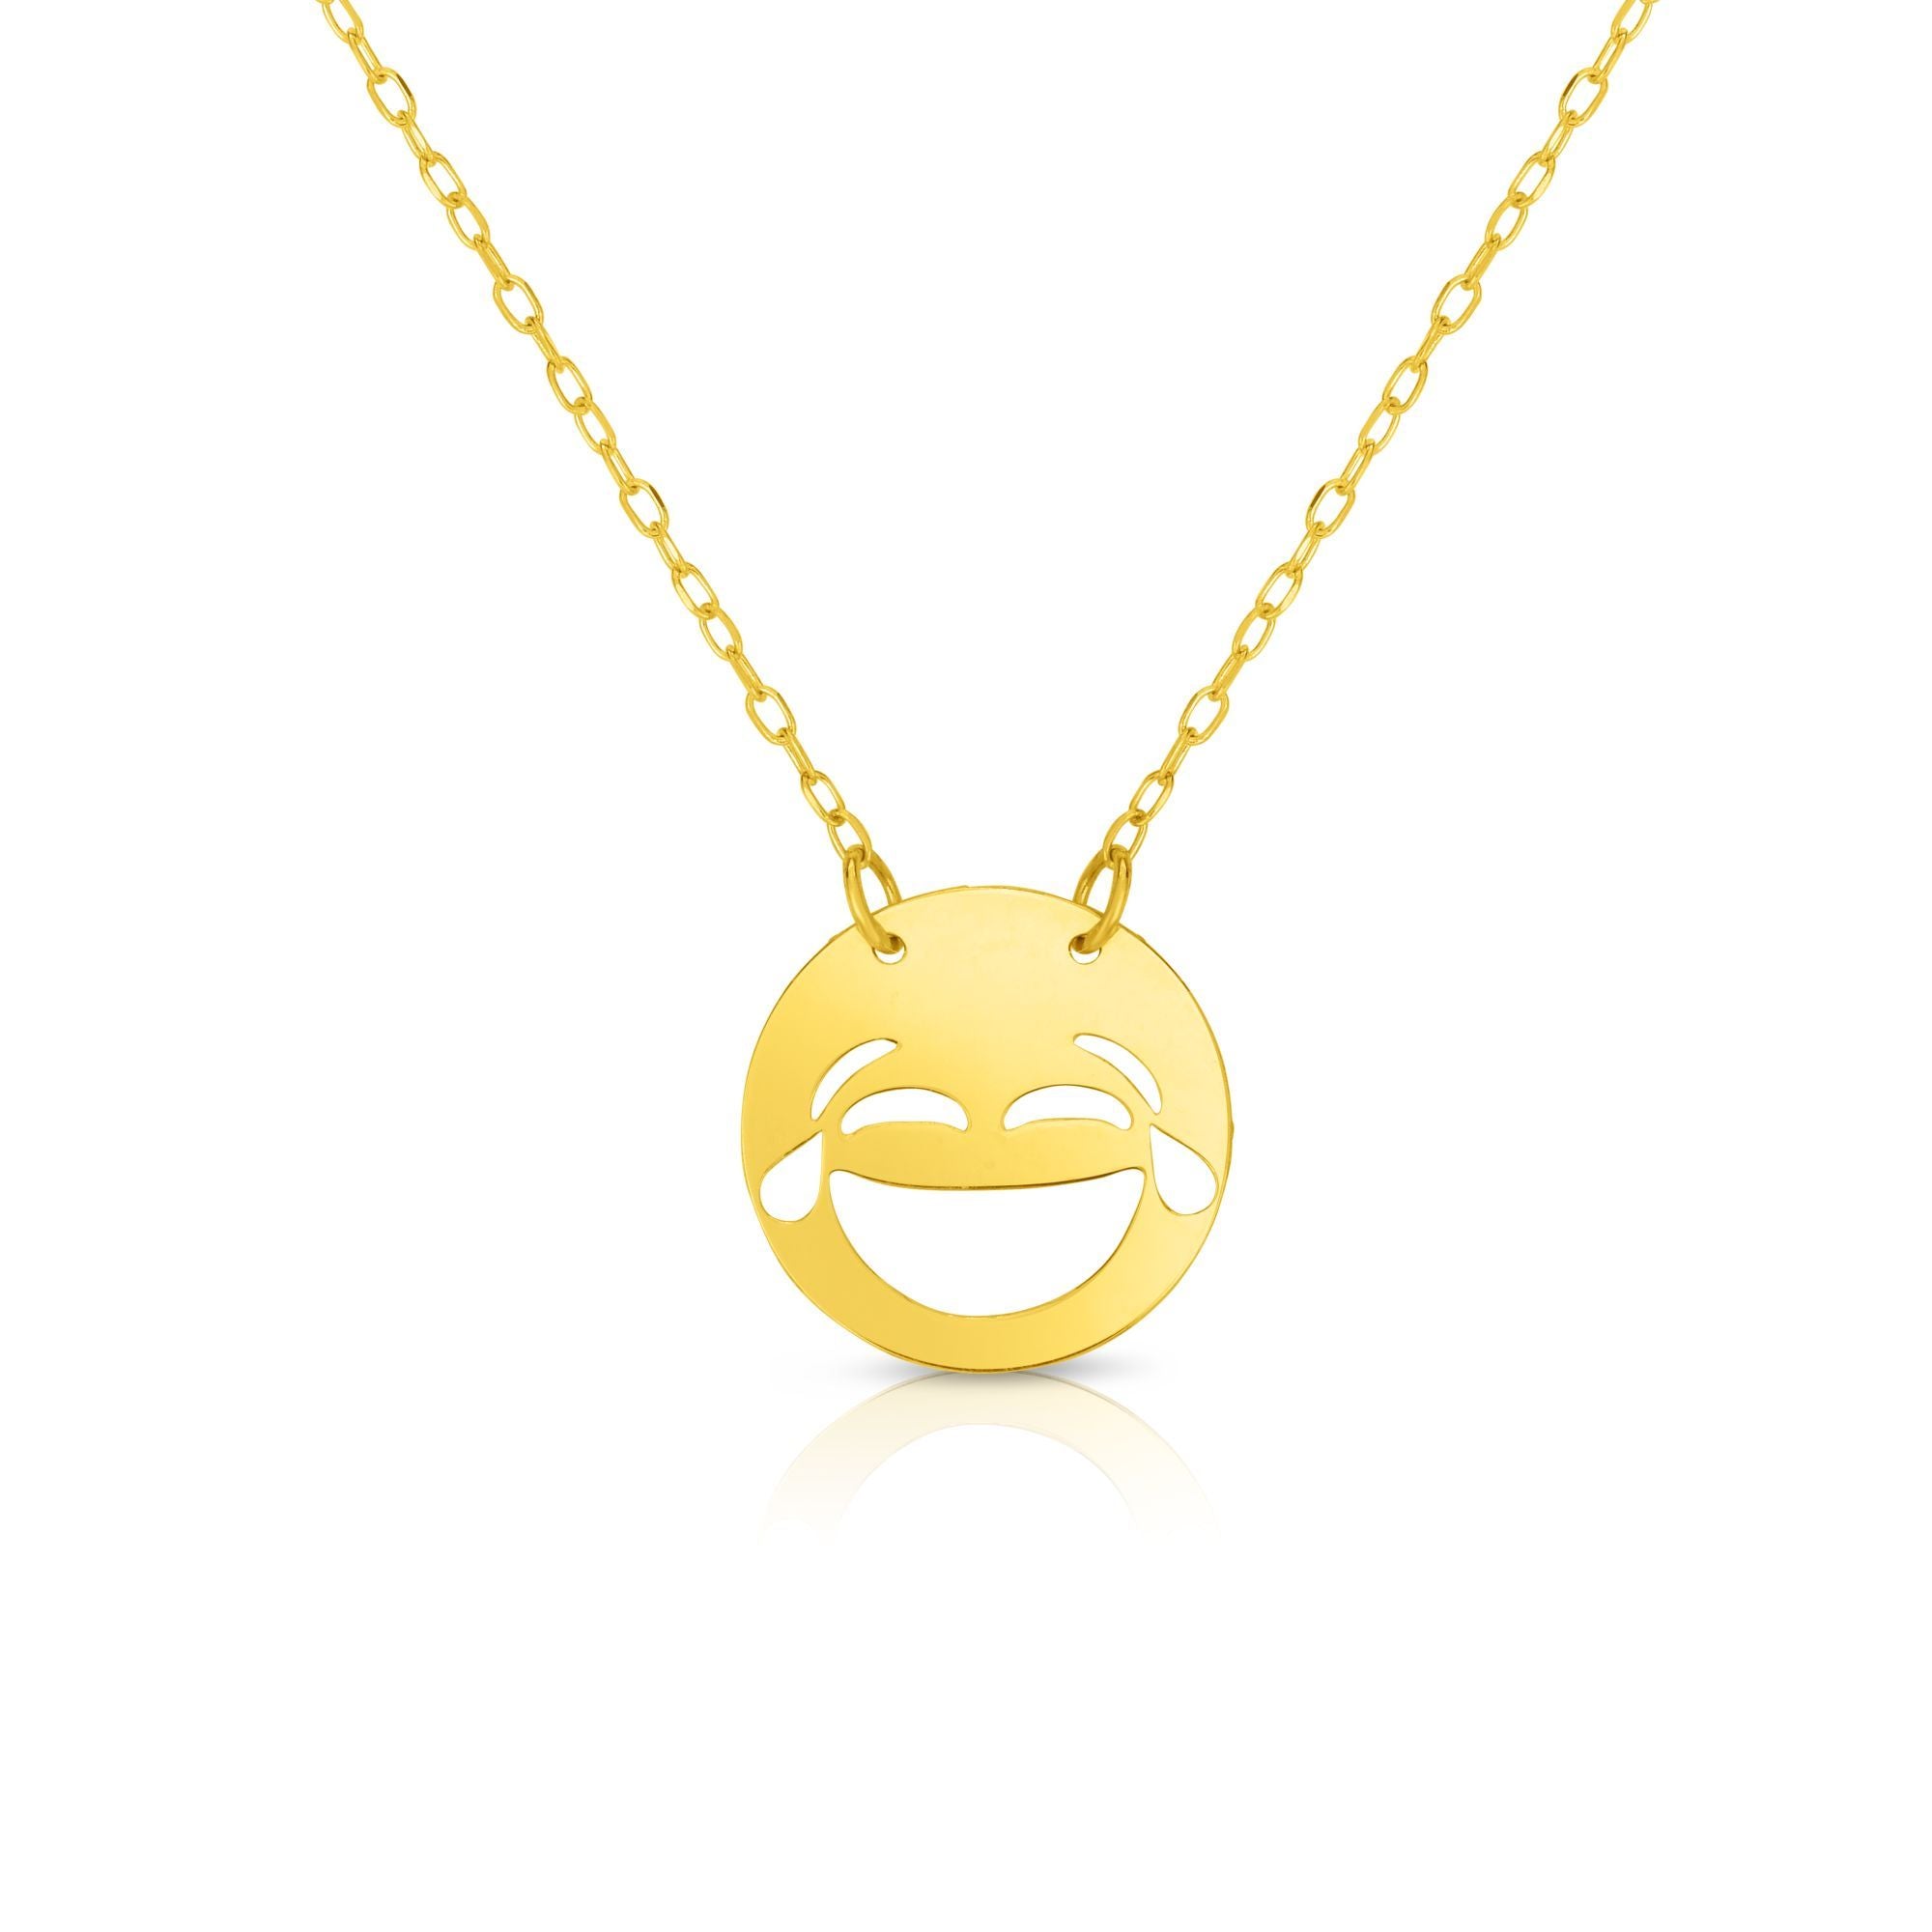 Minimalist Fancy Emoji Necklace with Cable Chain Necklace - wingroupjewelry